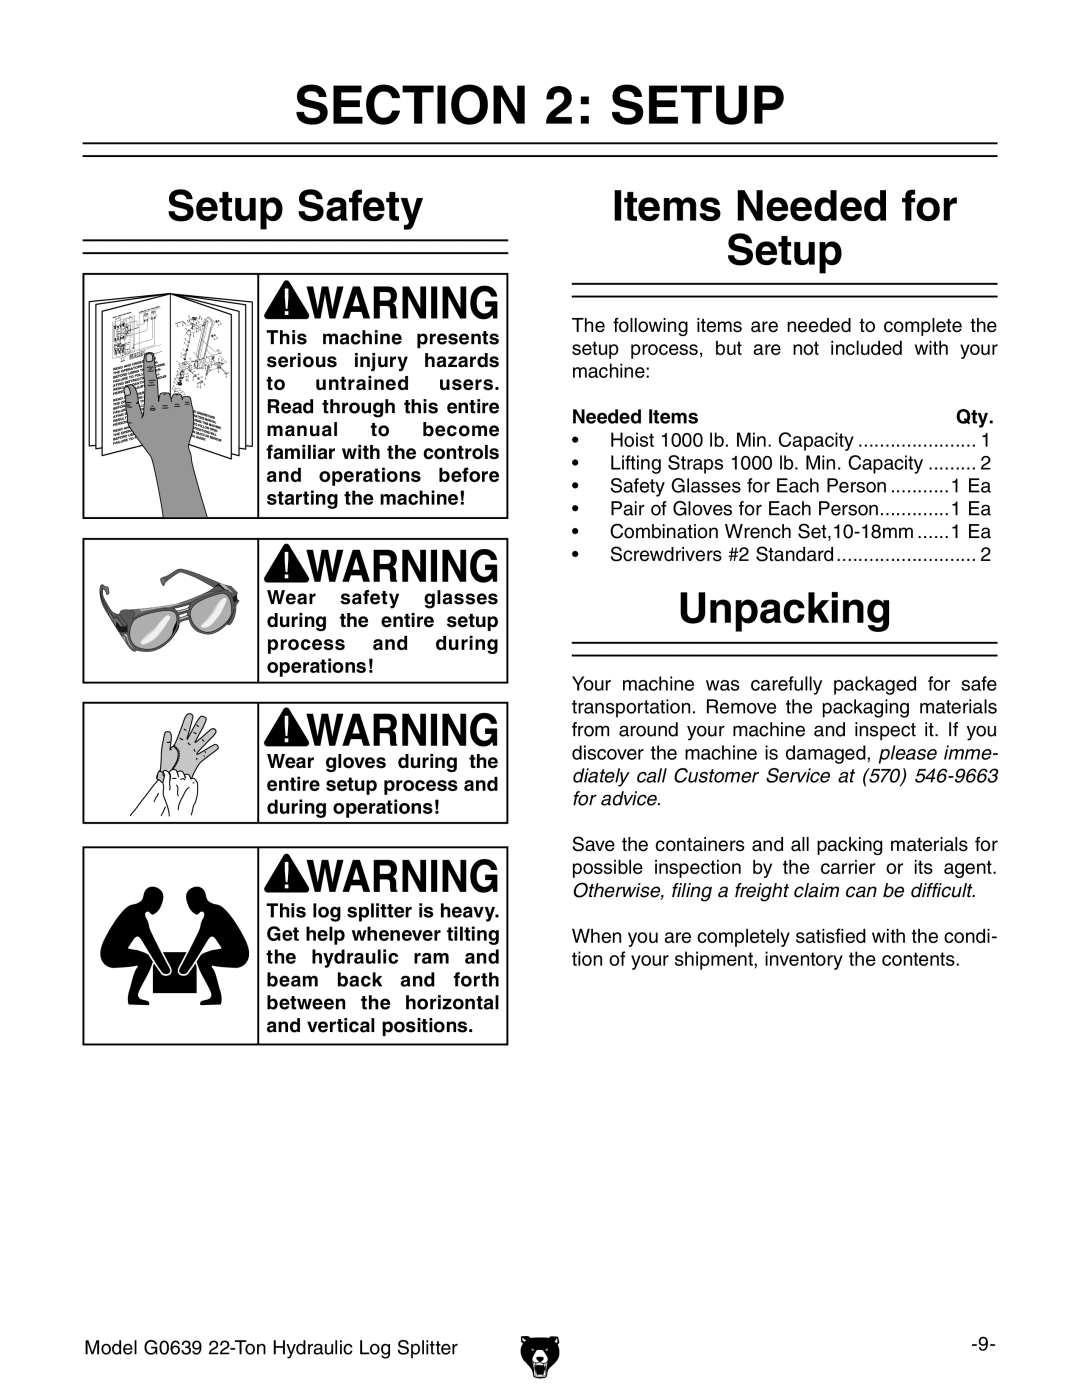 Grizzly G0639 owner manual Setup Safety, Items Needed for Setup, Unpacking 